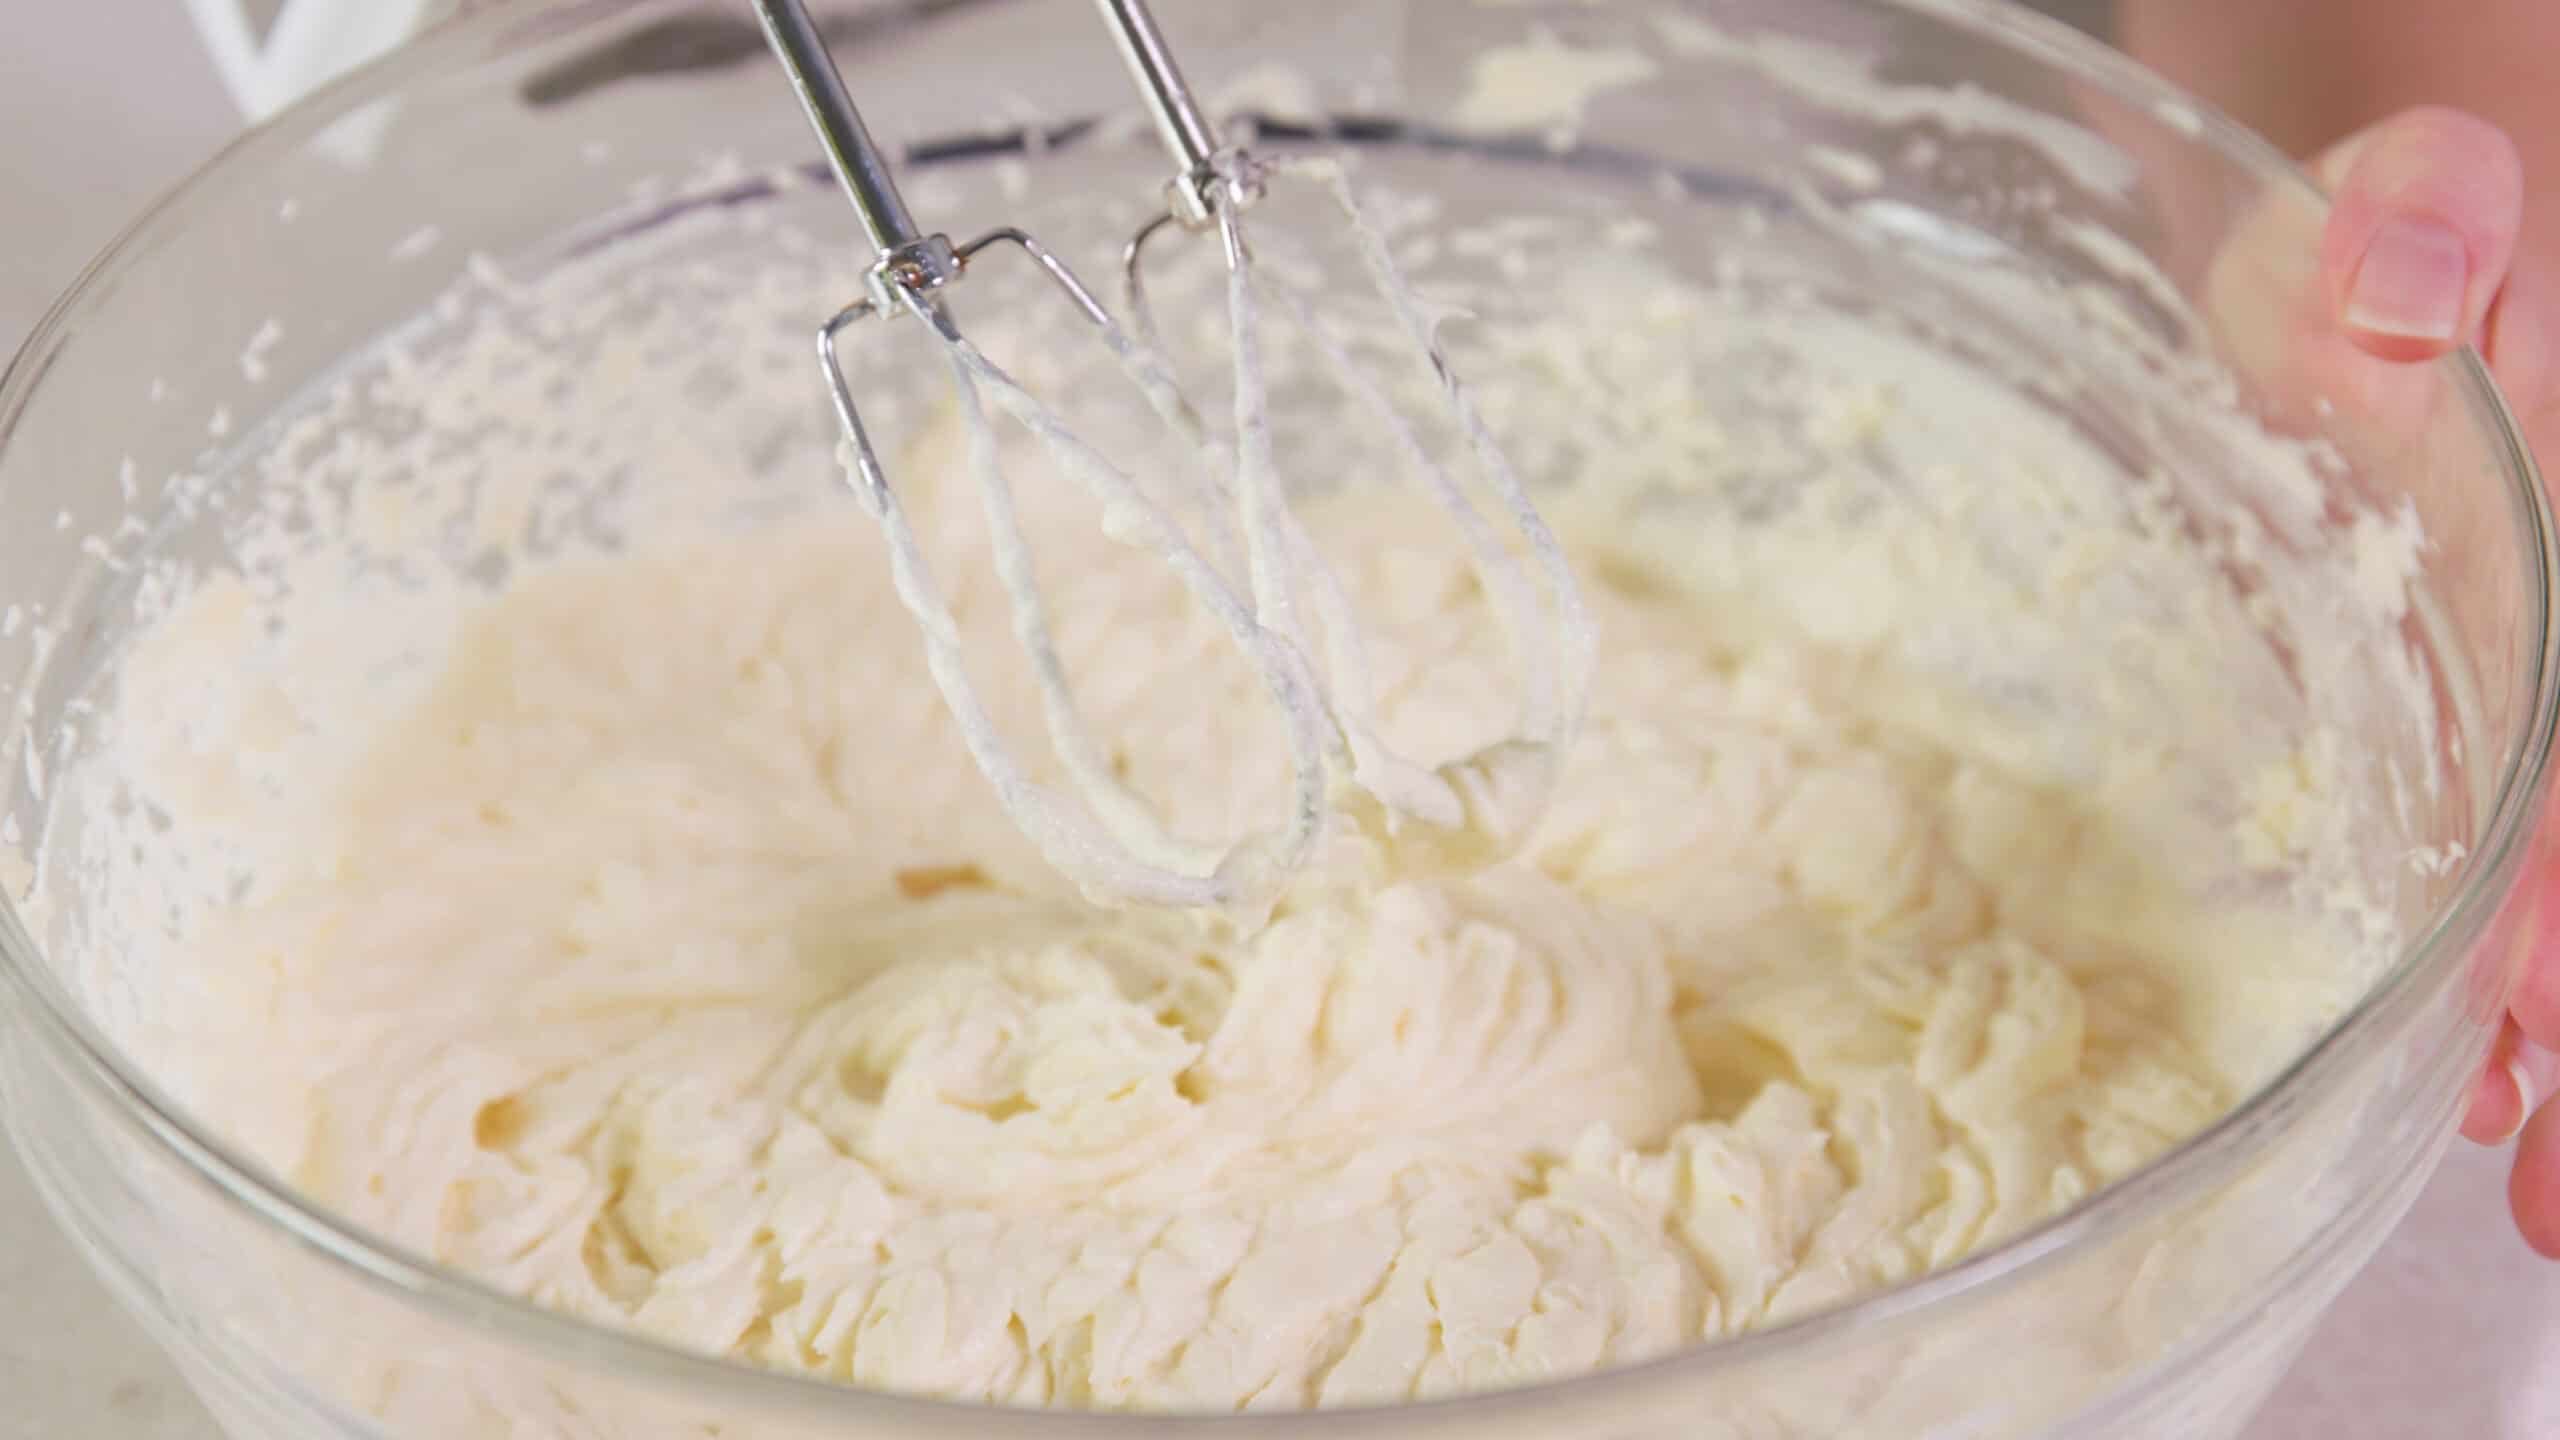 Close-up view of a large clear glass mixing bowl filled with whipped butter and milk mixture to complete Ermine Icing in preparation for topping the red velvet cupcakes.